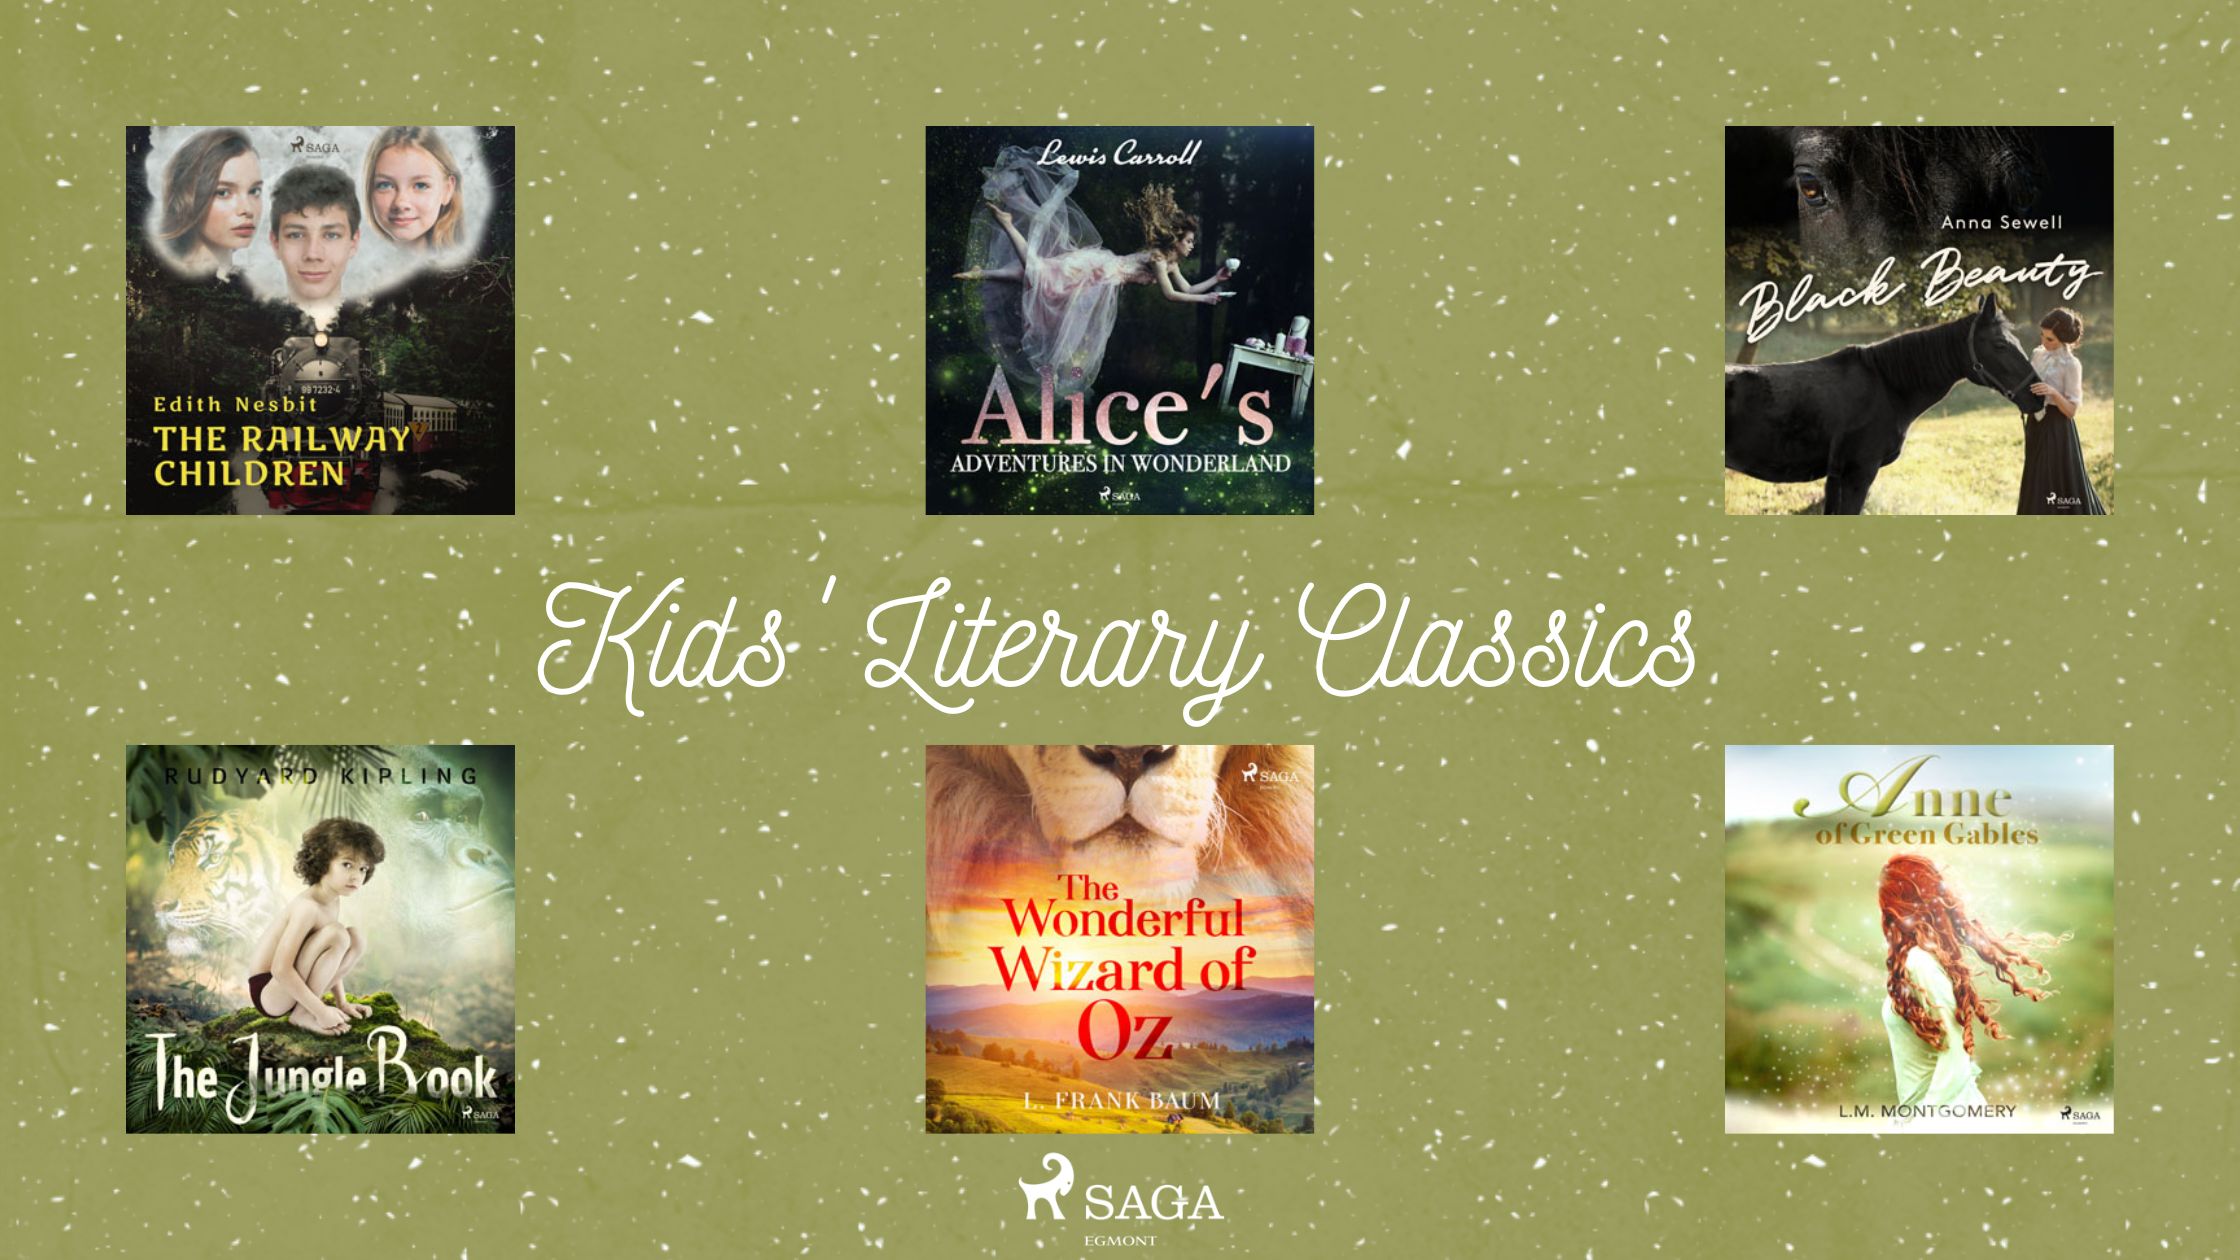 Rediscover these wonderful literary classics for kids